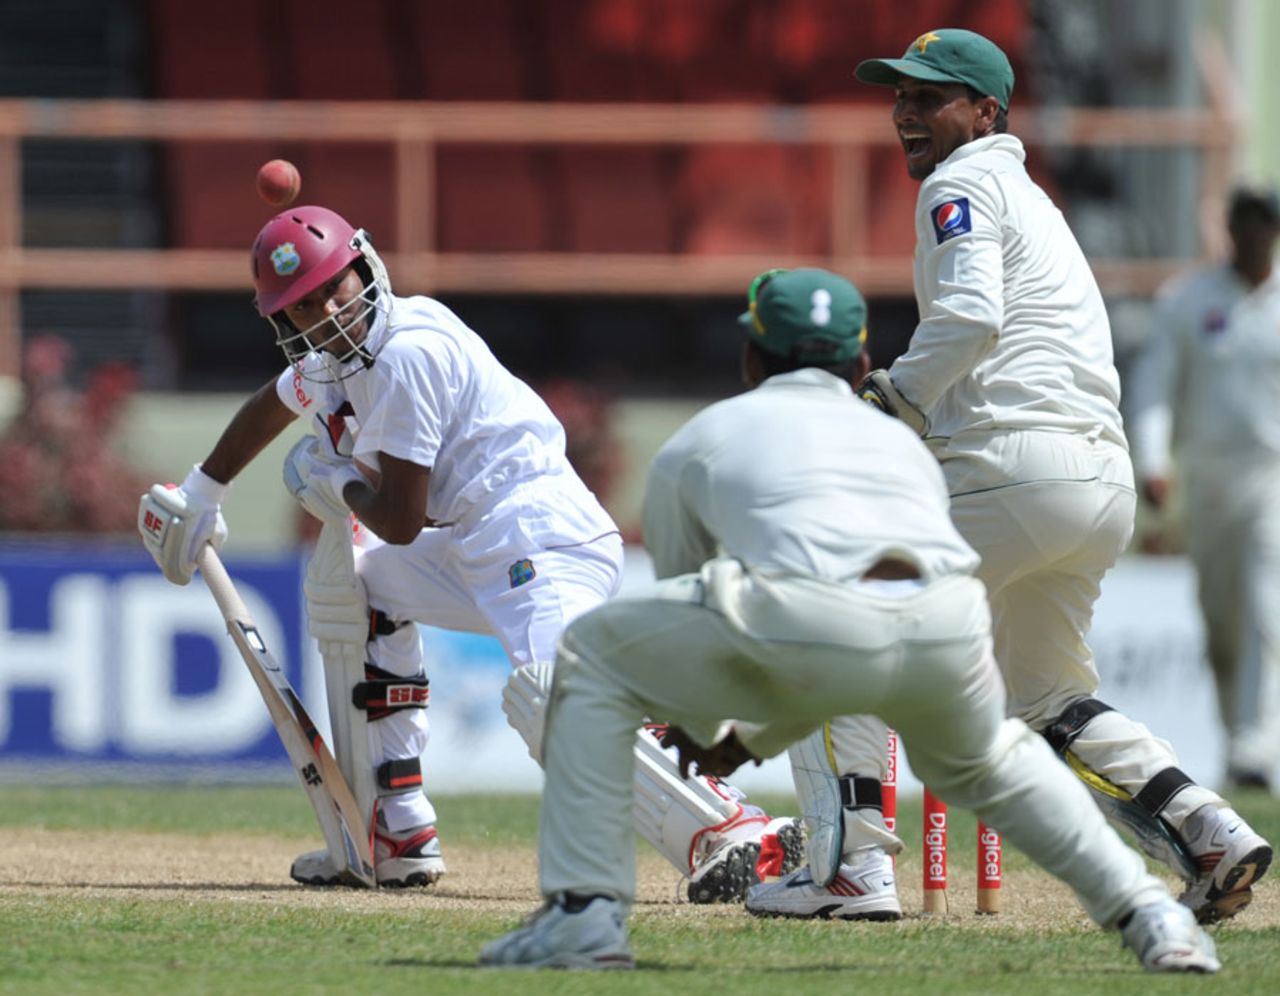 Devendra Bishoo survives a nervous moment, West Indies v Pakistan, 1st Test, Providence, 3rd day, May 14, 2011